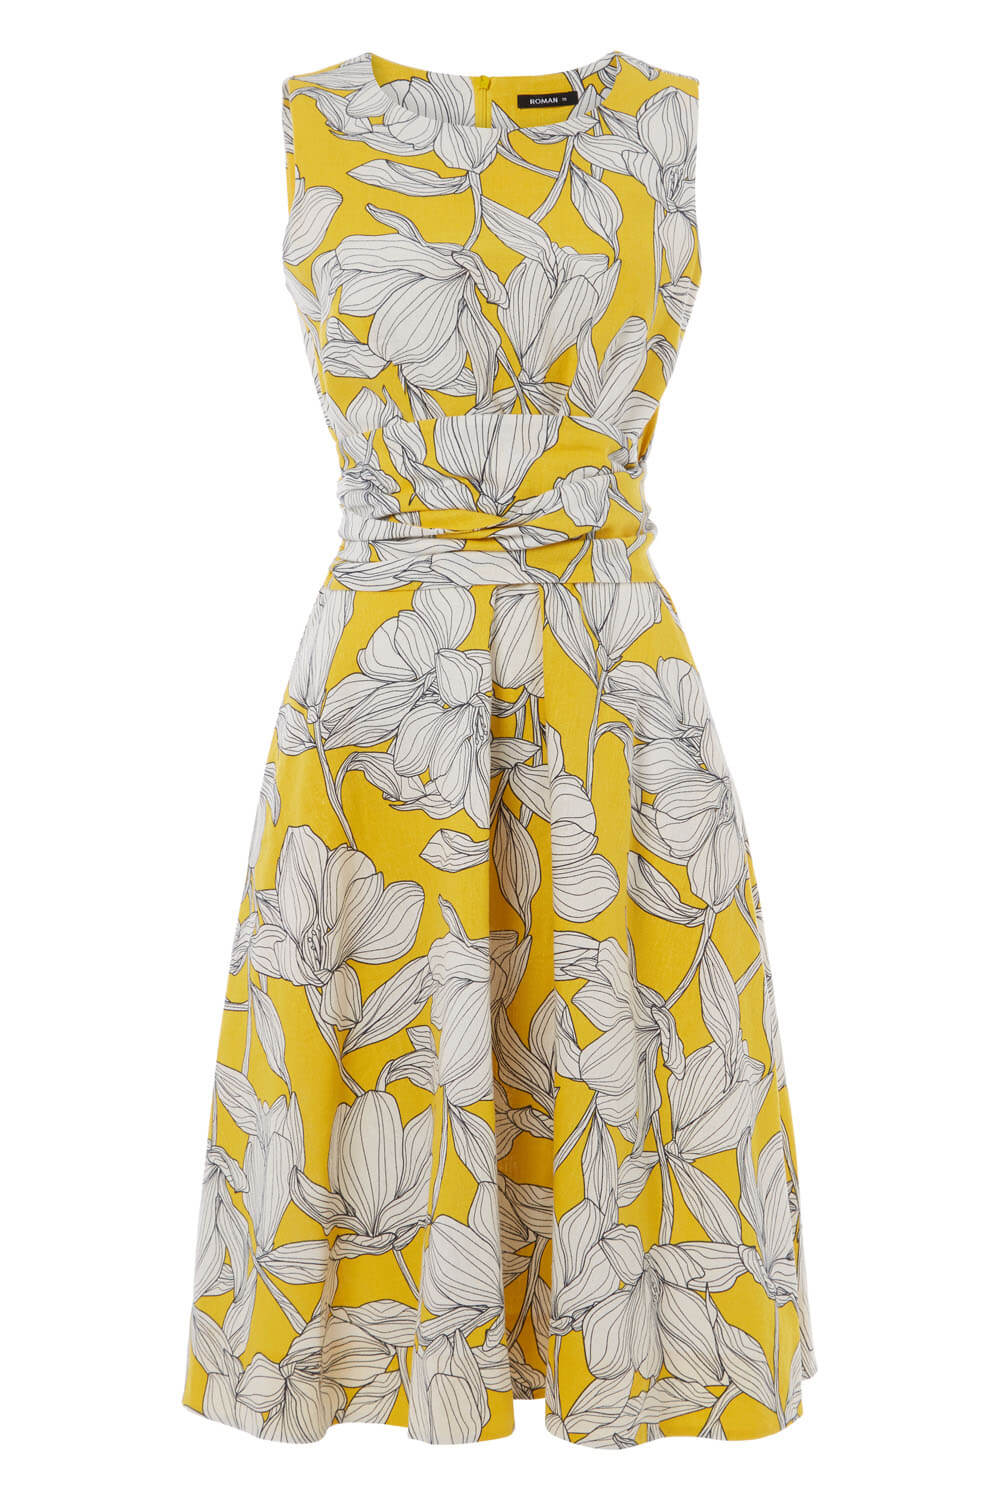 Yellow Floral Tie Waist Dress, Image 5 of 5